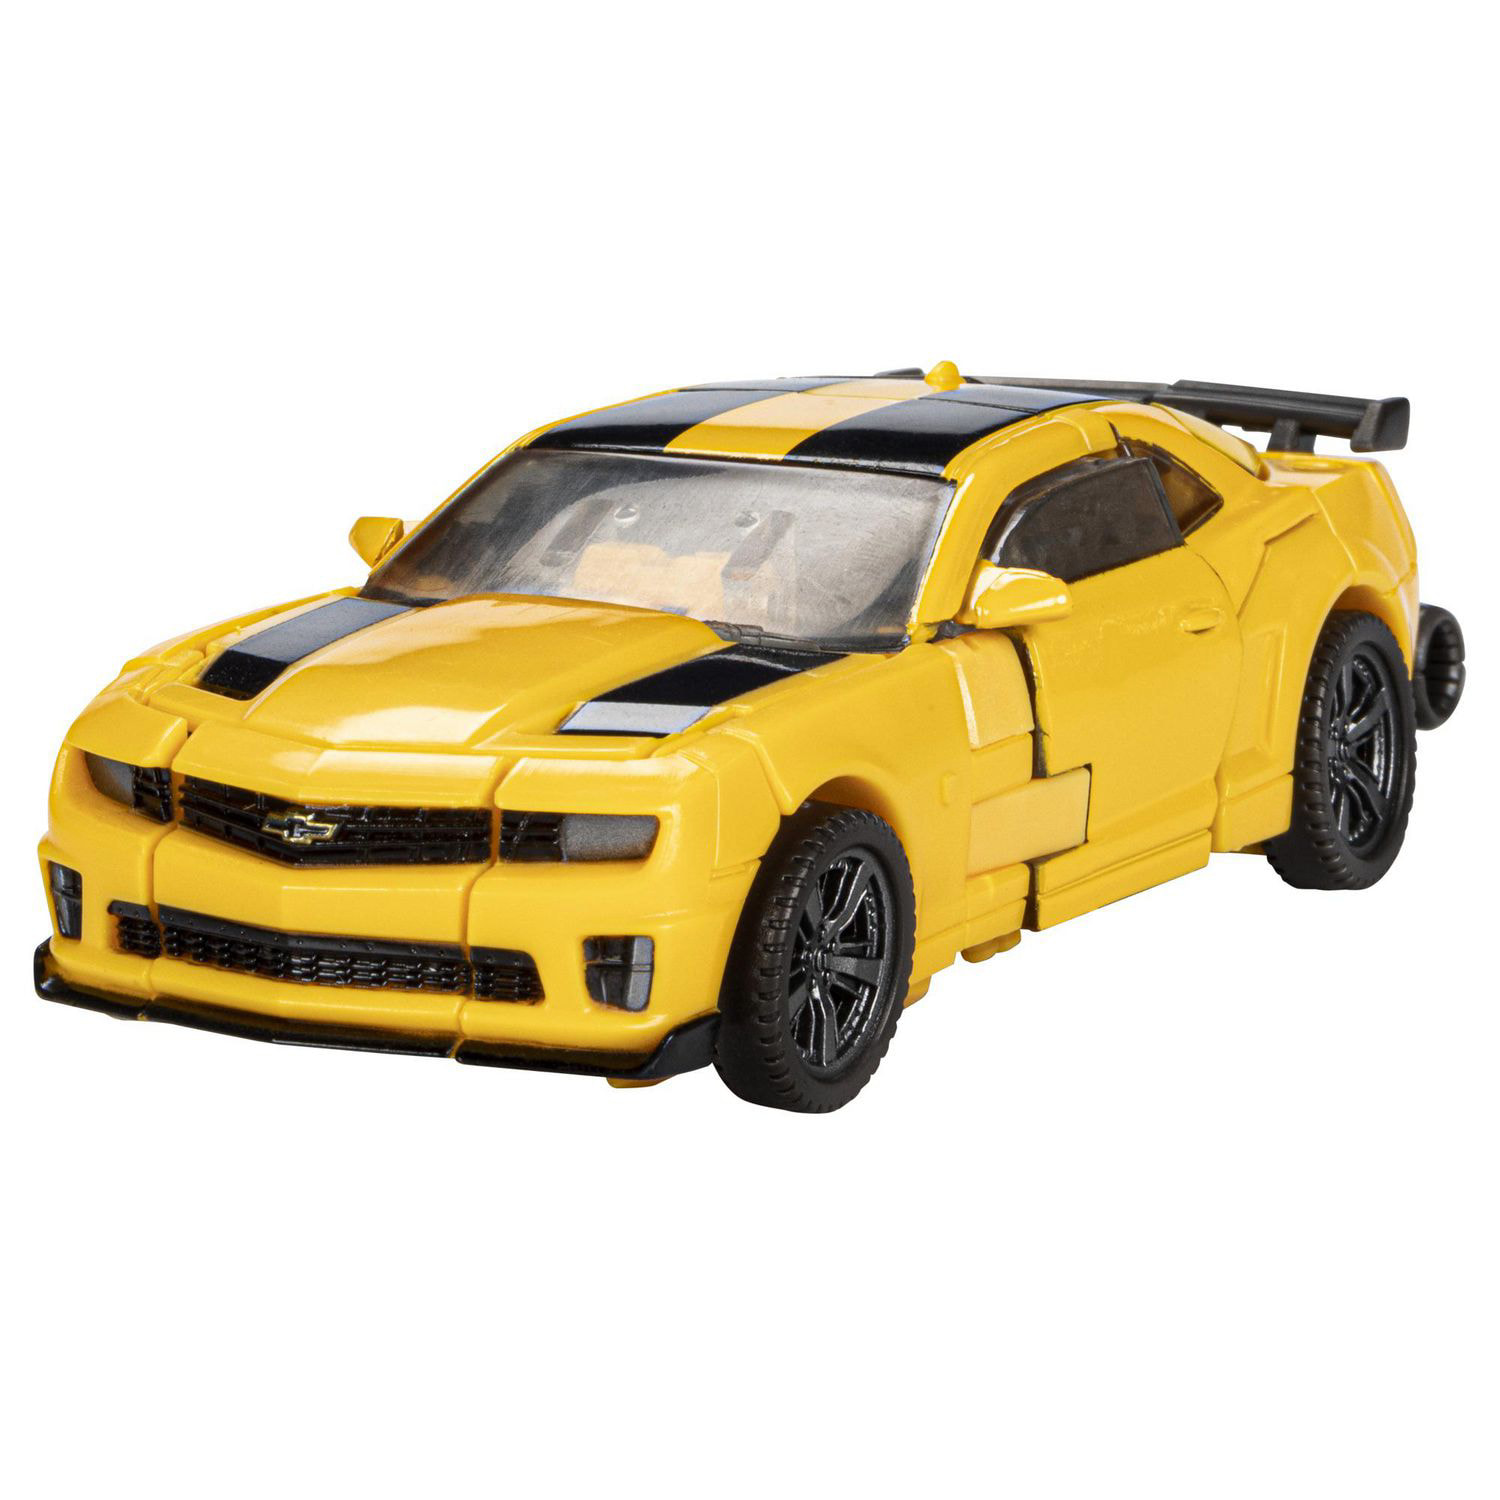 Transformers Toys Studio Series 87 Deluxe Class Transformers: Dark of the  Moon Bumblebee Action Figure - Ages 8 and Up, 4.5-inch